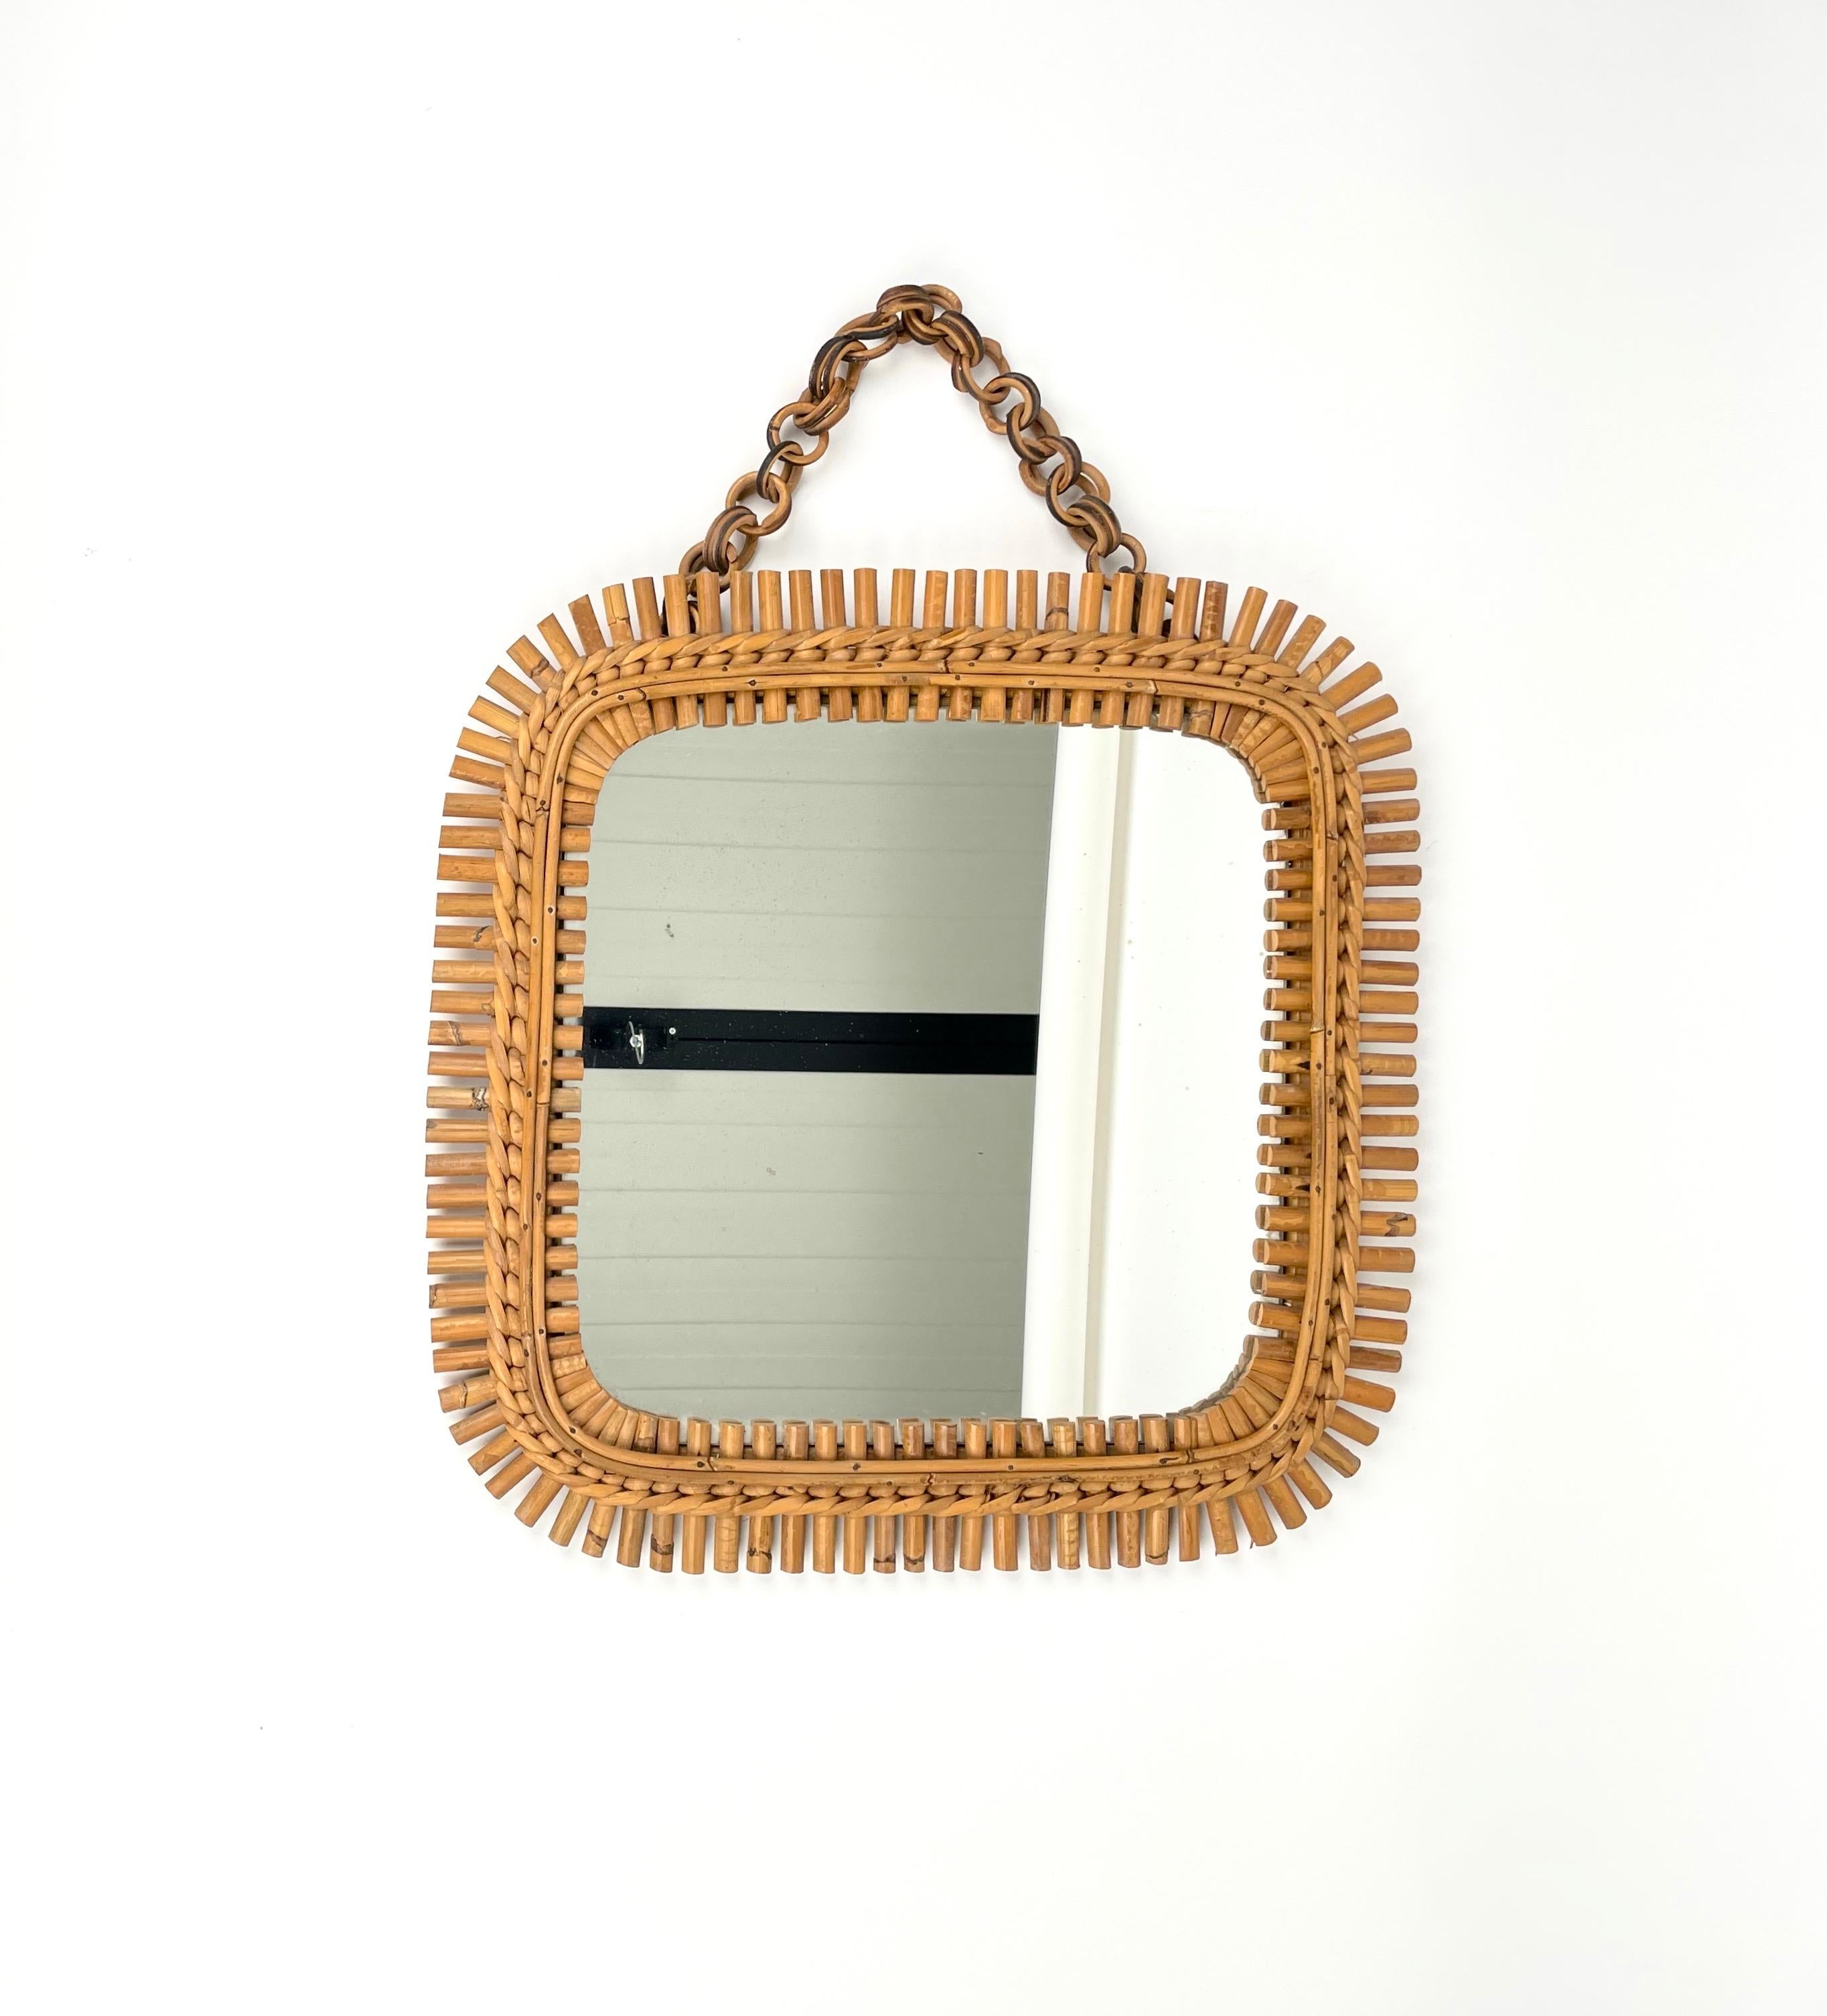 Beautiful squared wall mirror with chain in bamboo and rattan. 

Made in Italy in the 1960s.